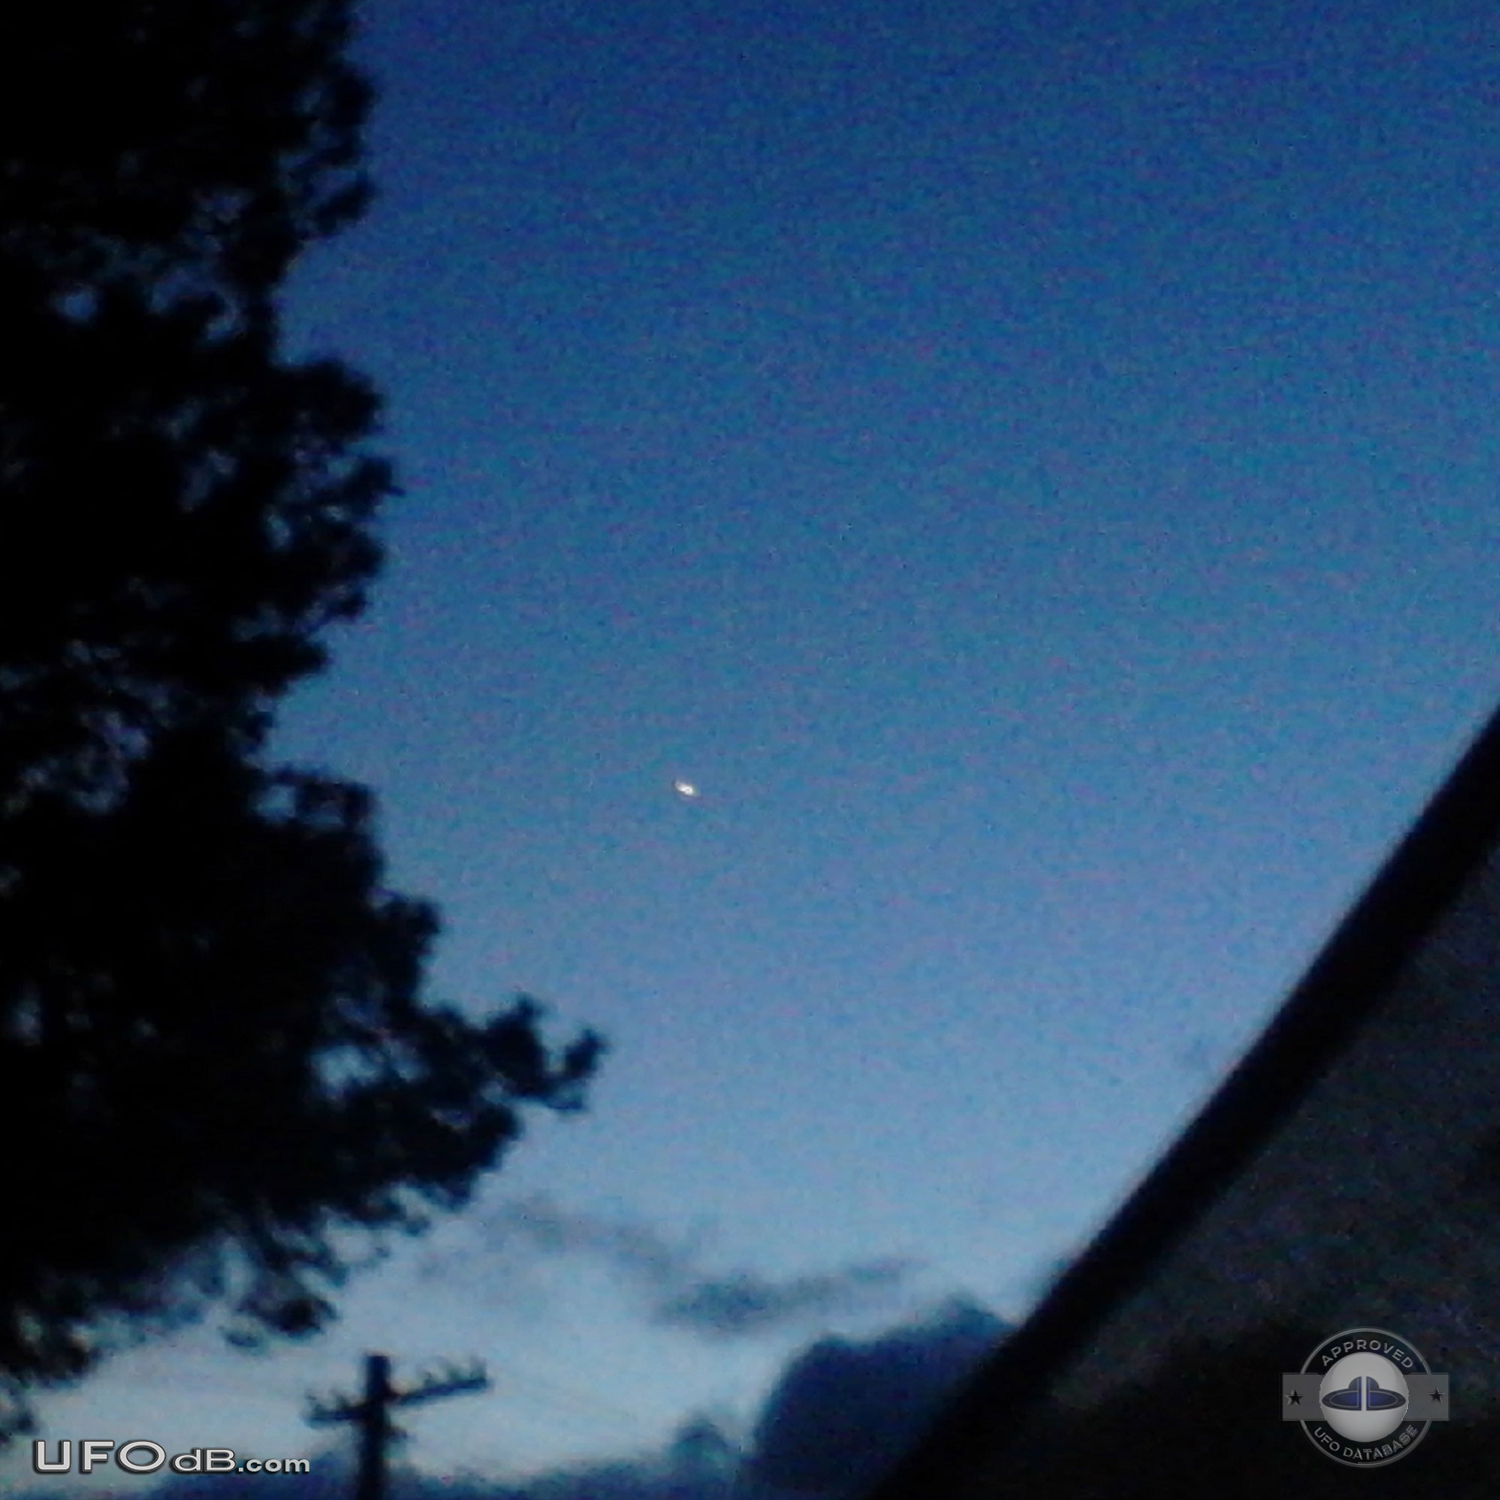 Unmoving Star turns out to be a UFO in Cooma, NSW, Australia 2012 UFO Picture #477-1